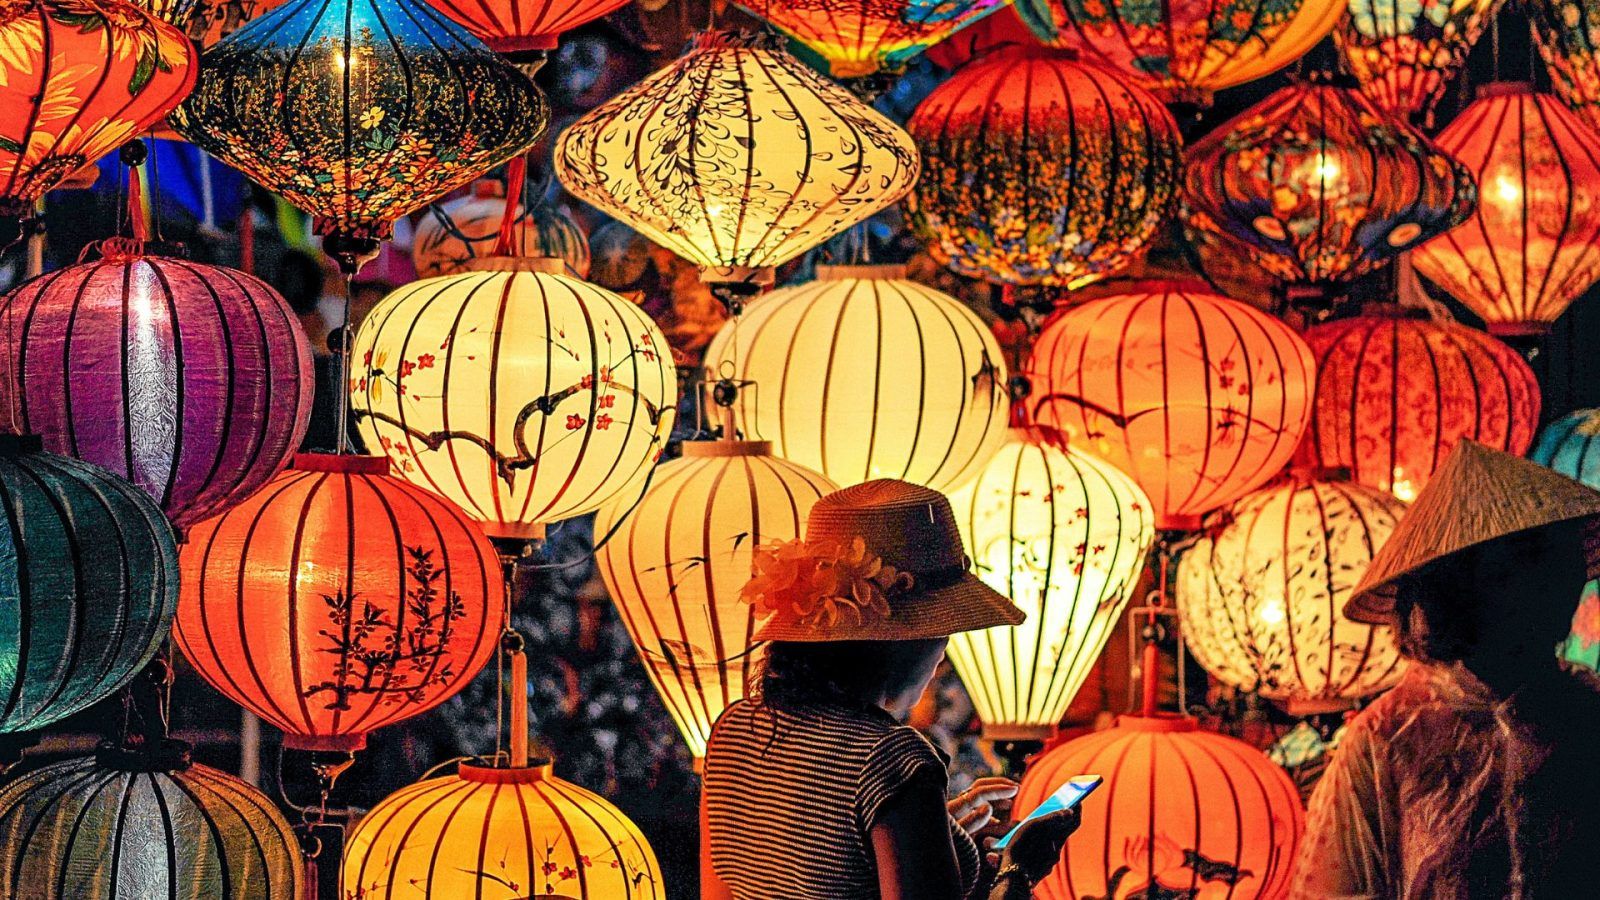 Chinese Lantern Festival: Origin, significance, and events